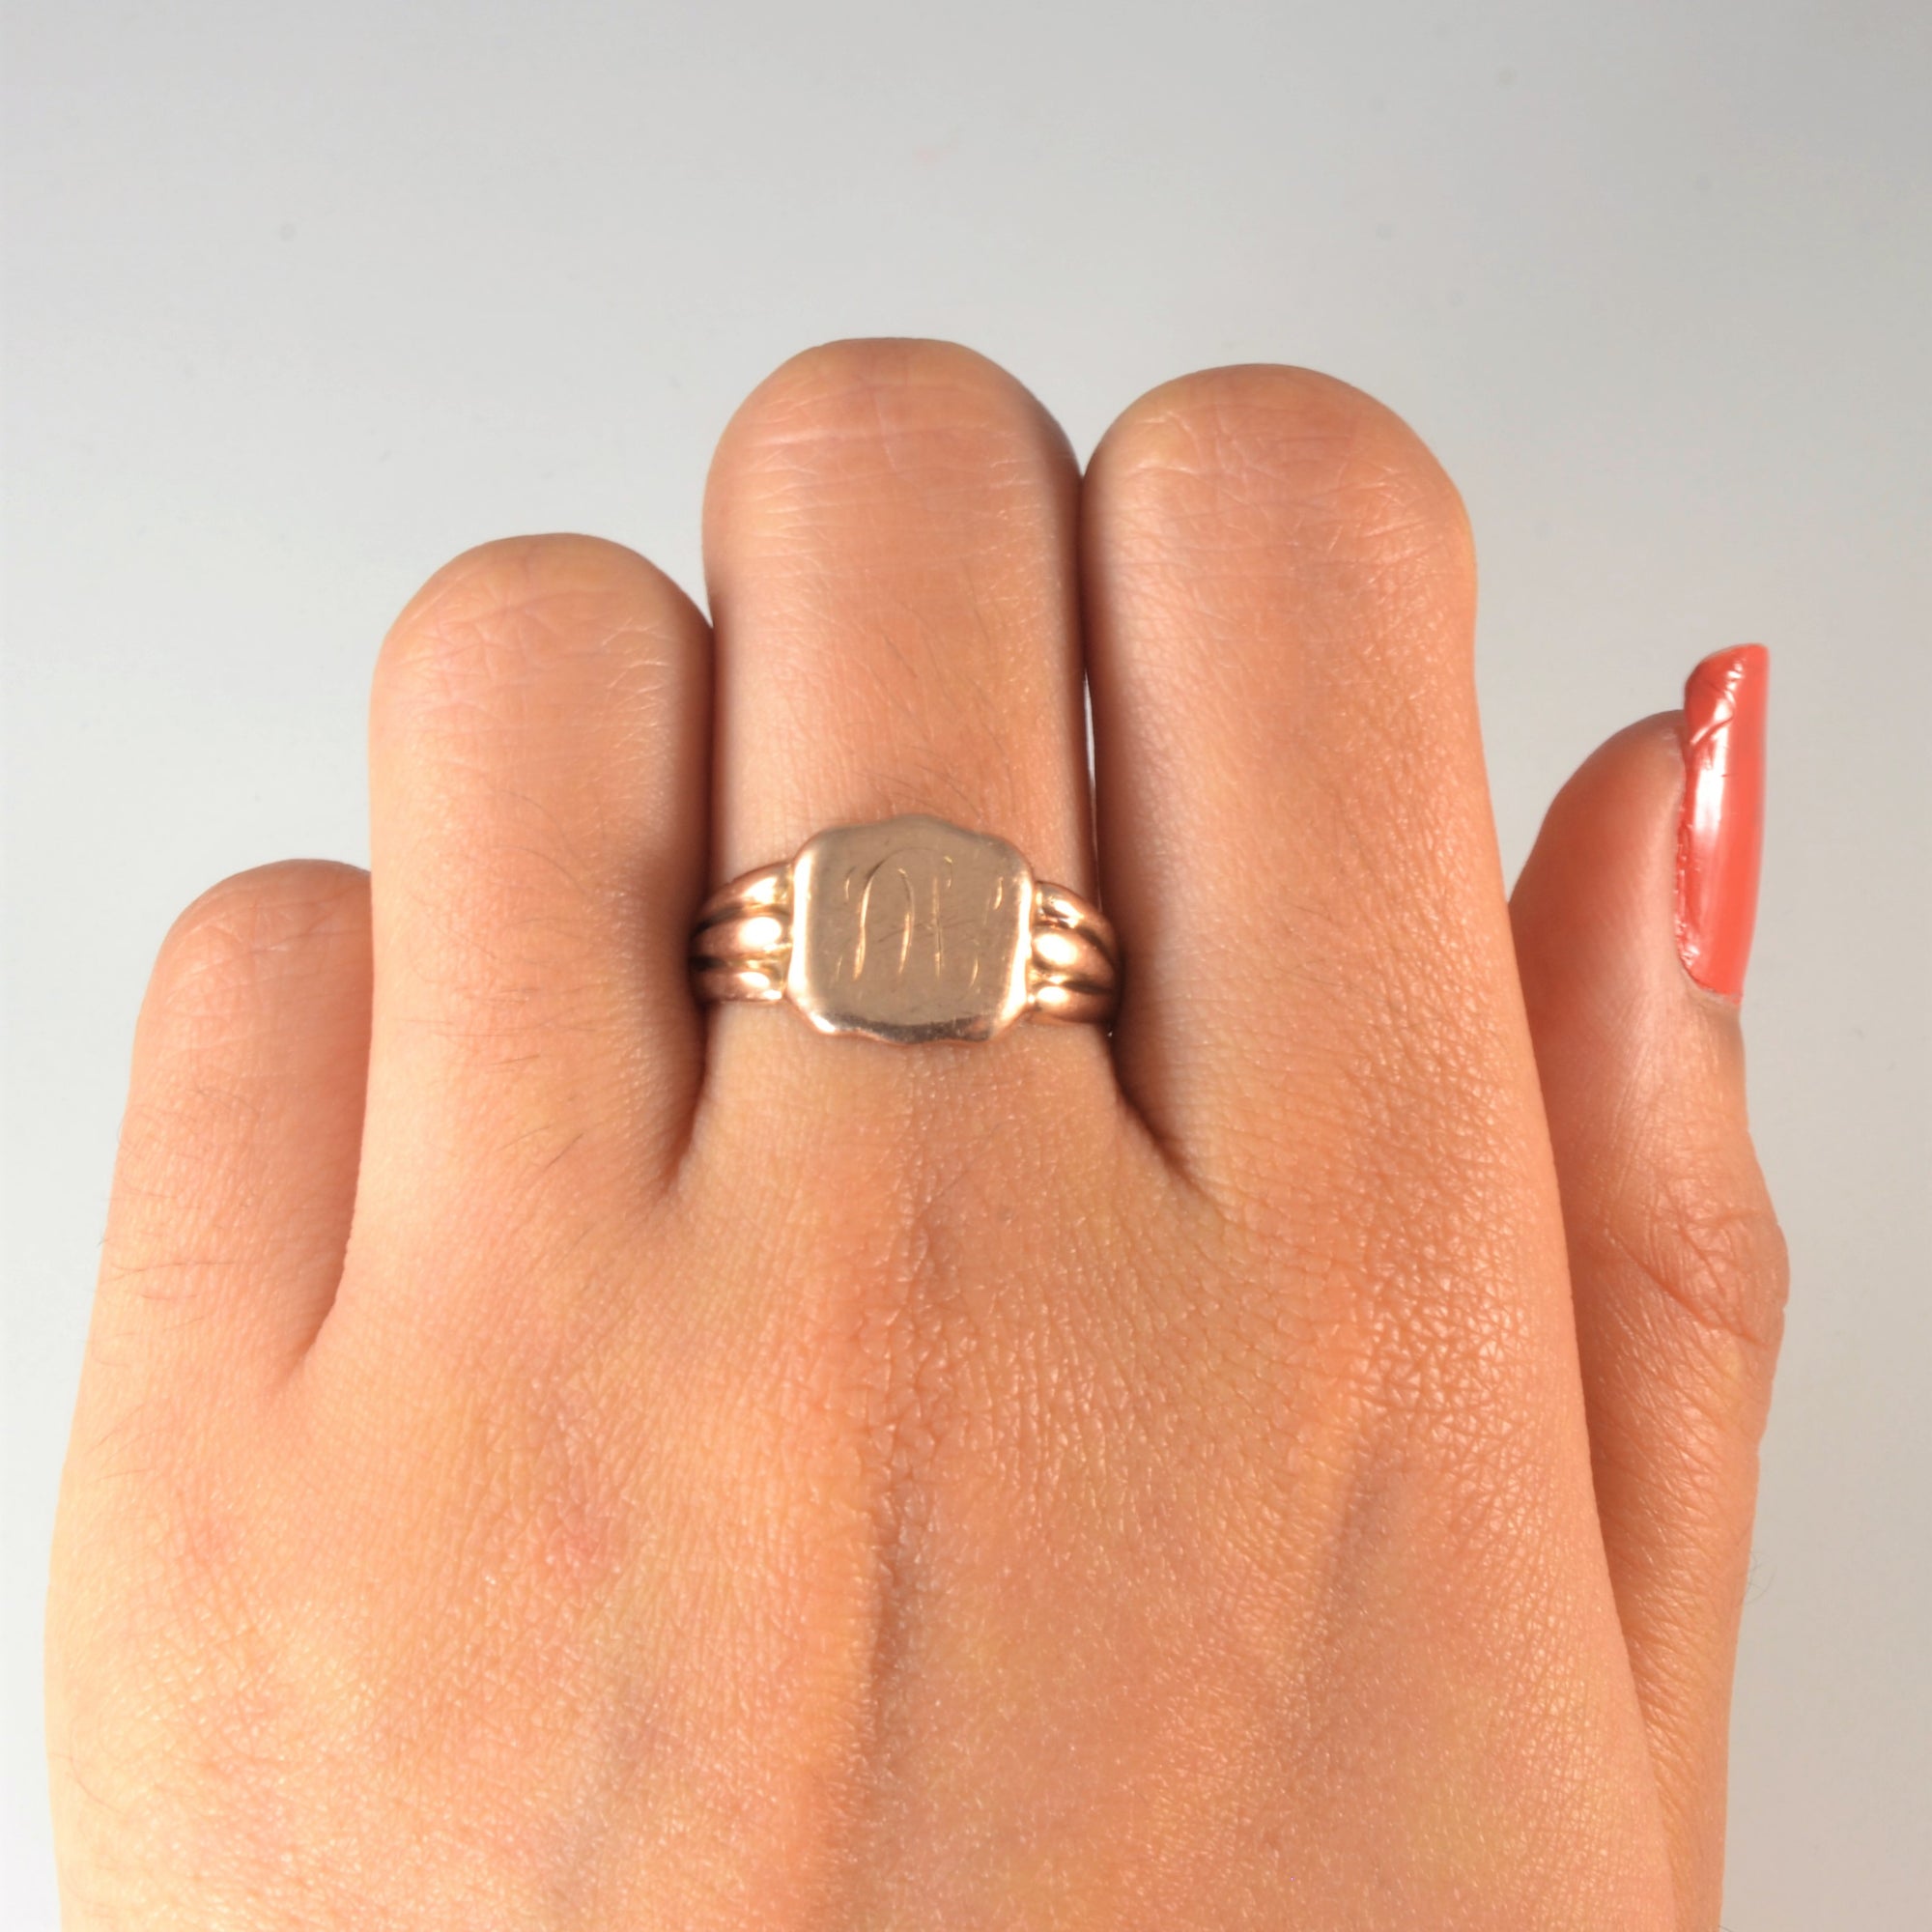 Engraved Initial 'MB' Signet Ring | SZ 8.25 |